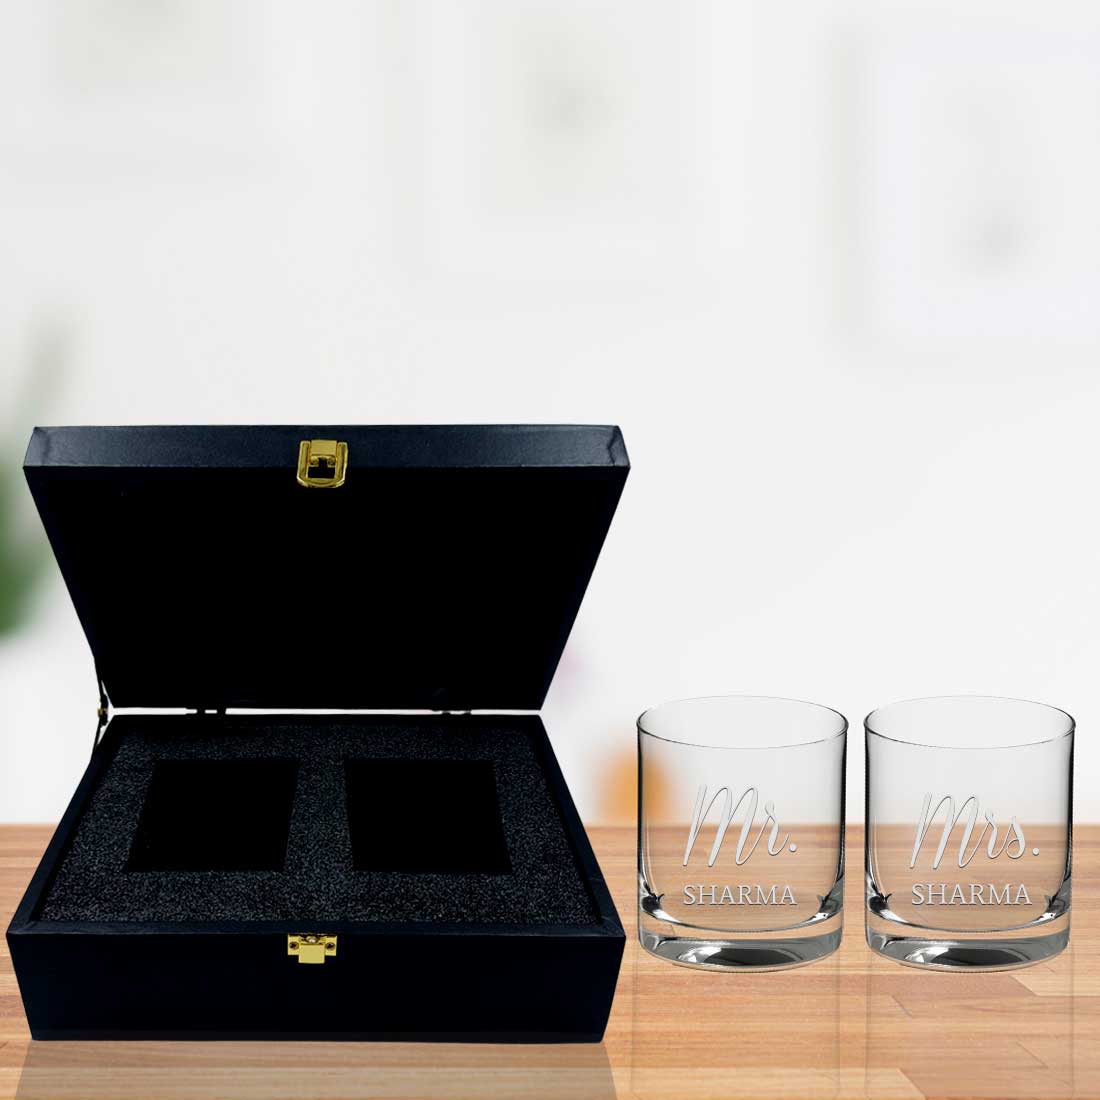 comfit Couples Wine and Whiskey Glass Gift Set - His and Her Wine and  Whiskey Glasses Sets for Mr an…See more comfit Couples Wine and Whiskey  Glass